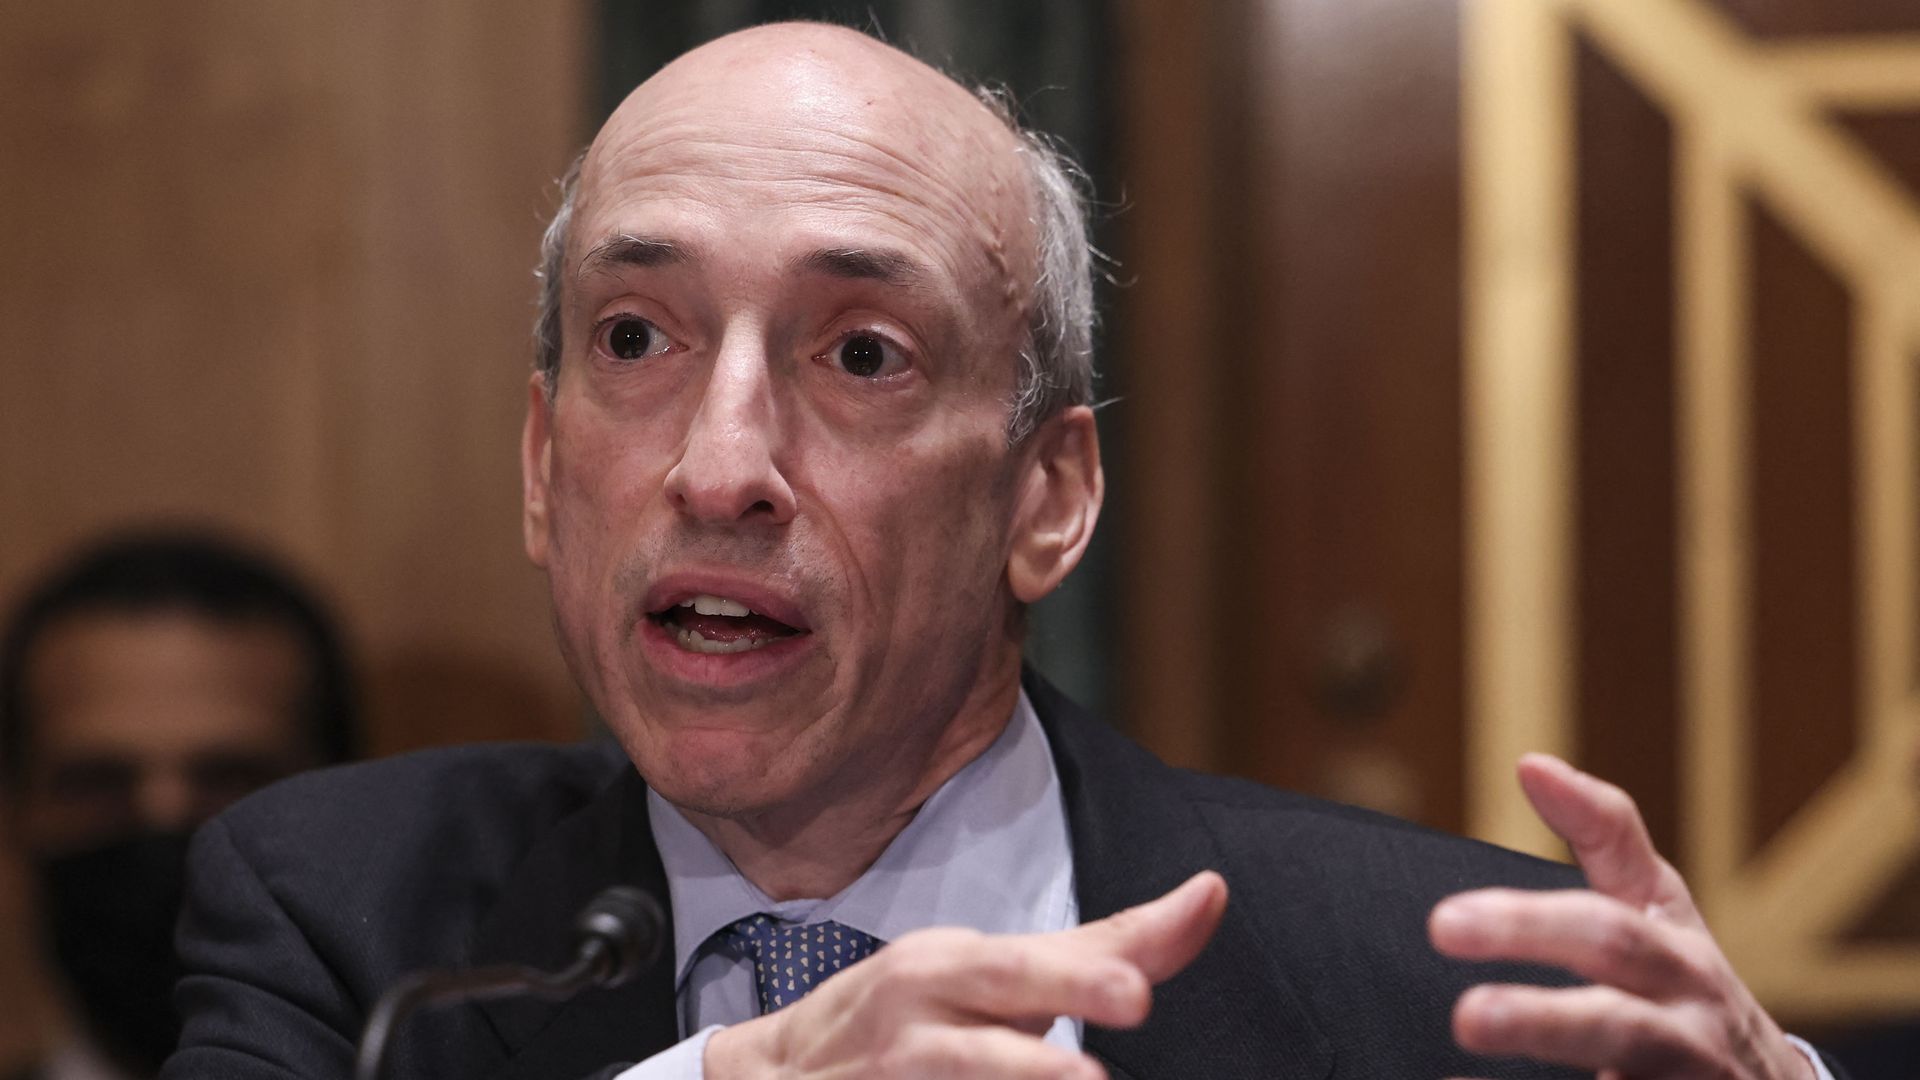 Gary Gensler, Chair of the Securities and Exchange Commission, testifies during a committee hearing